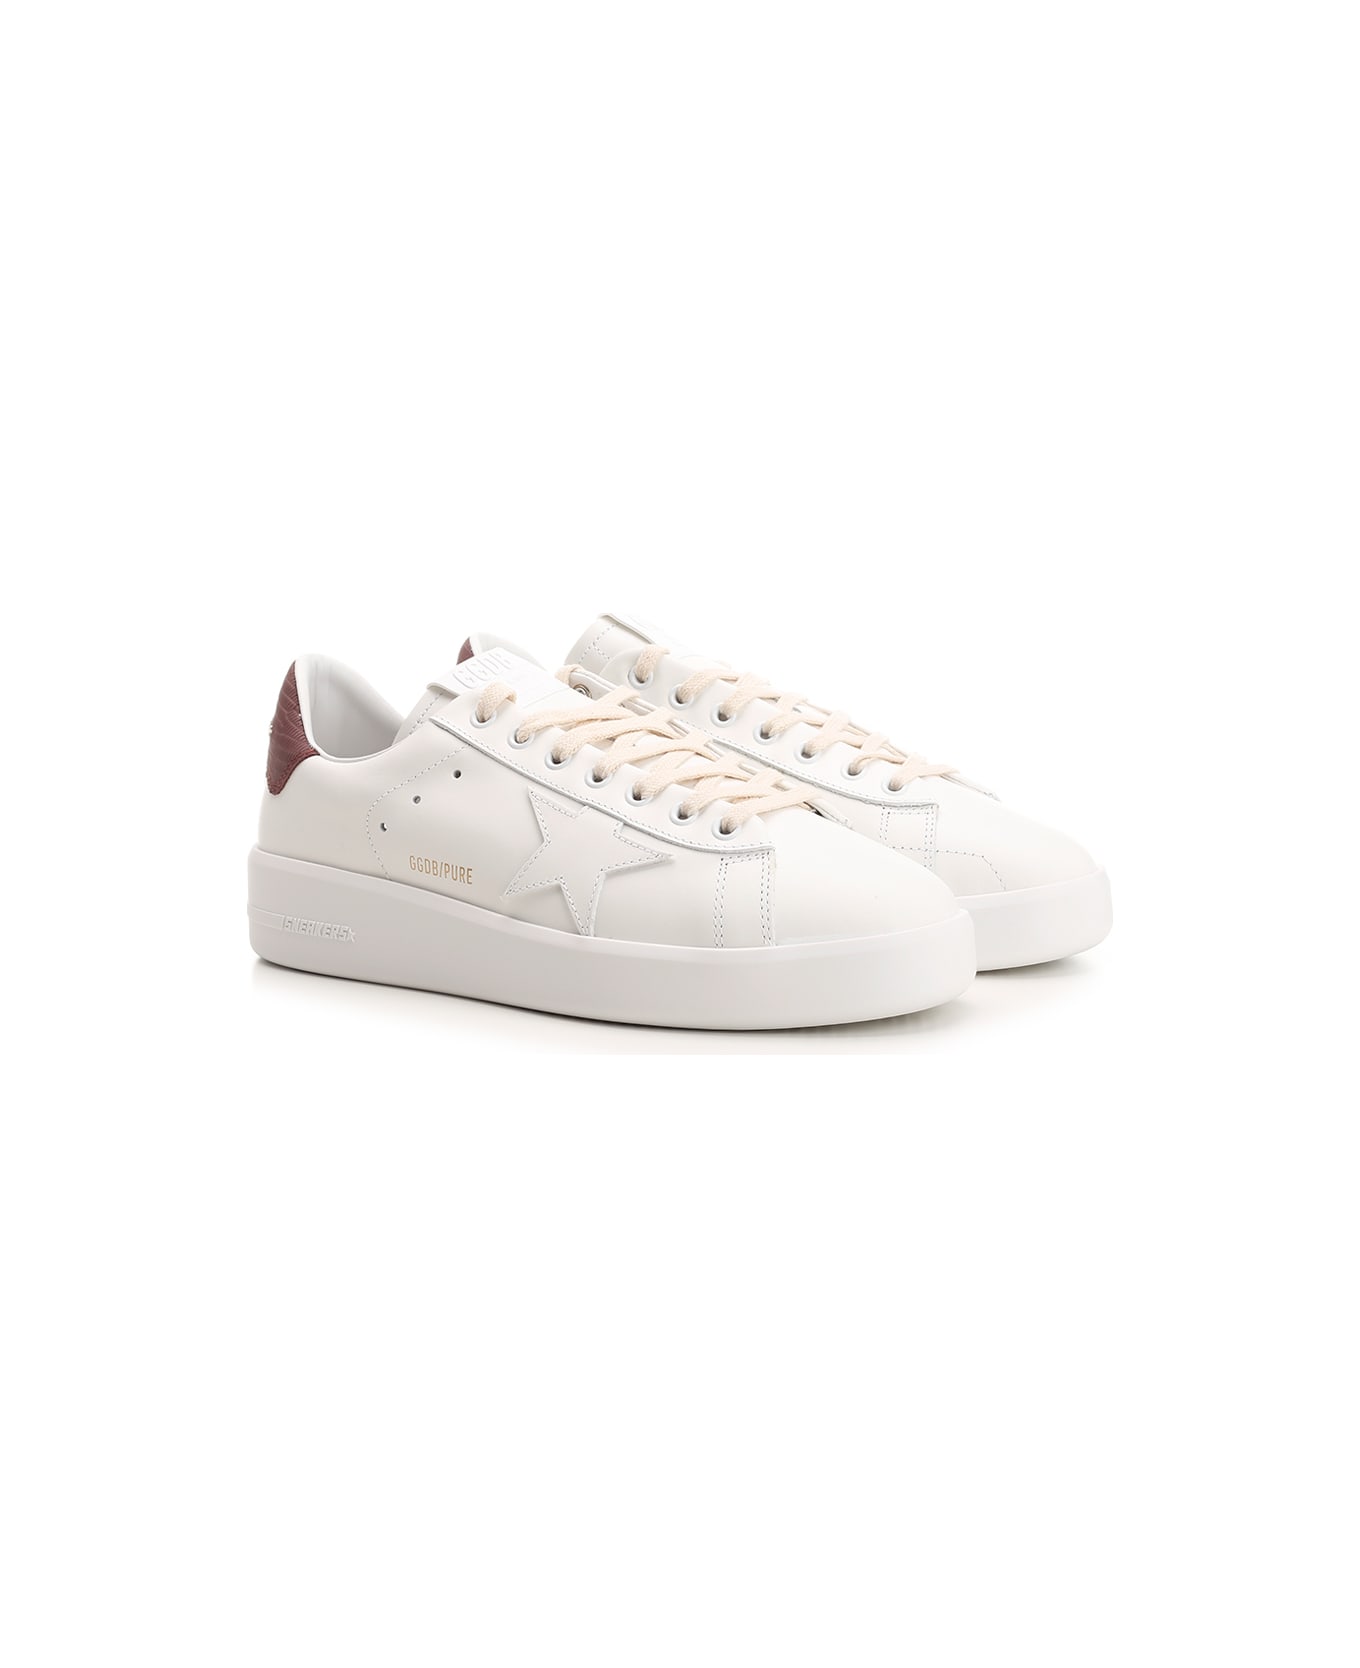 Golden Goose Pure New Leather Sneakers - White/Bordeaux スニーカー